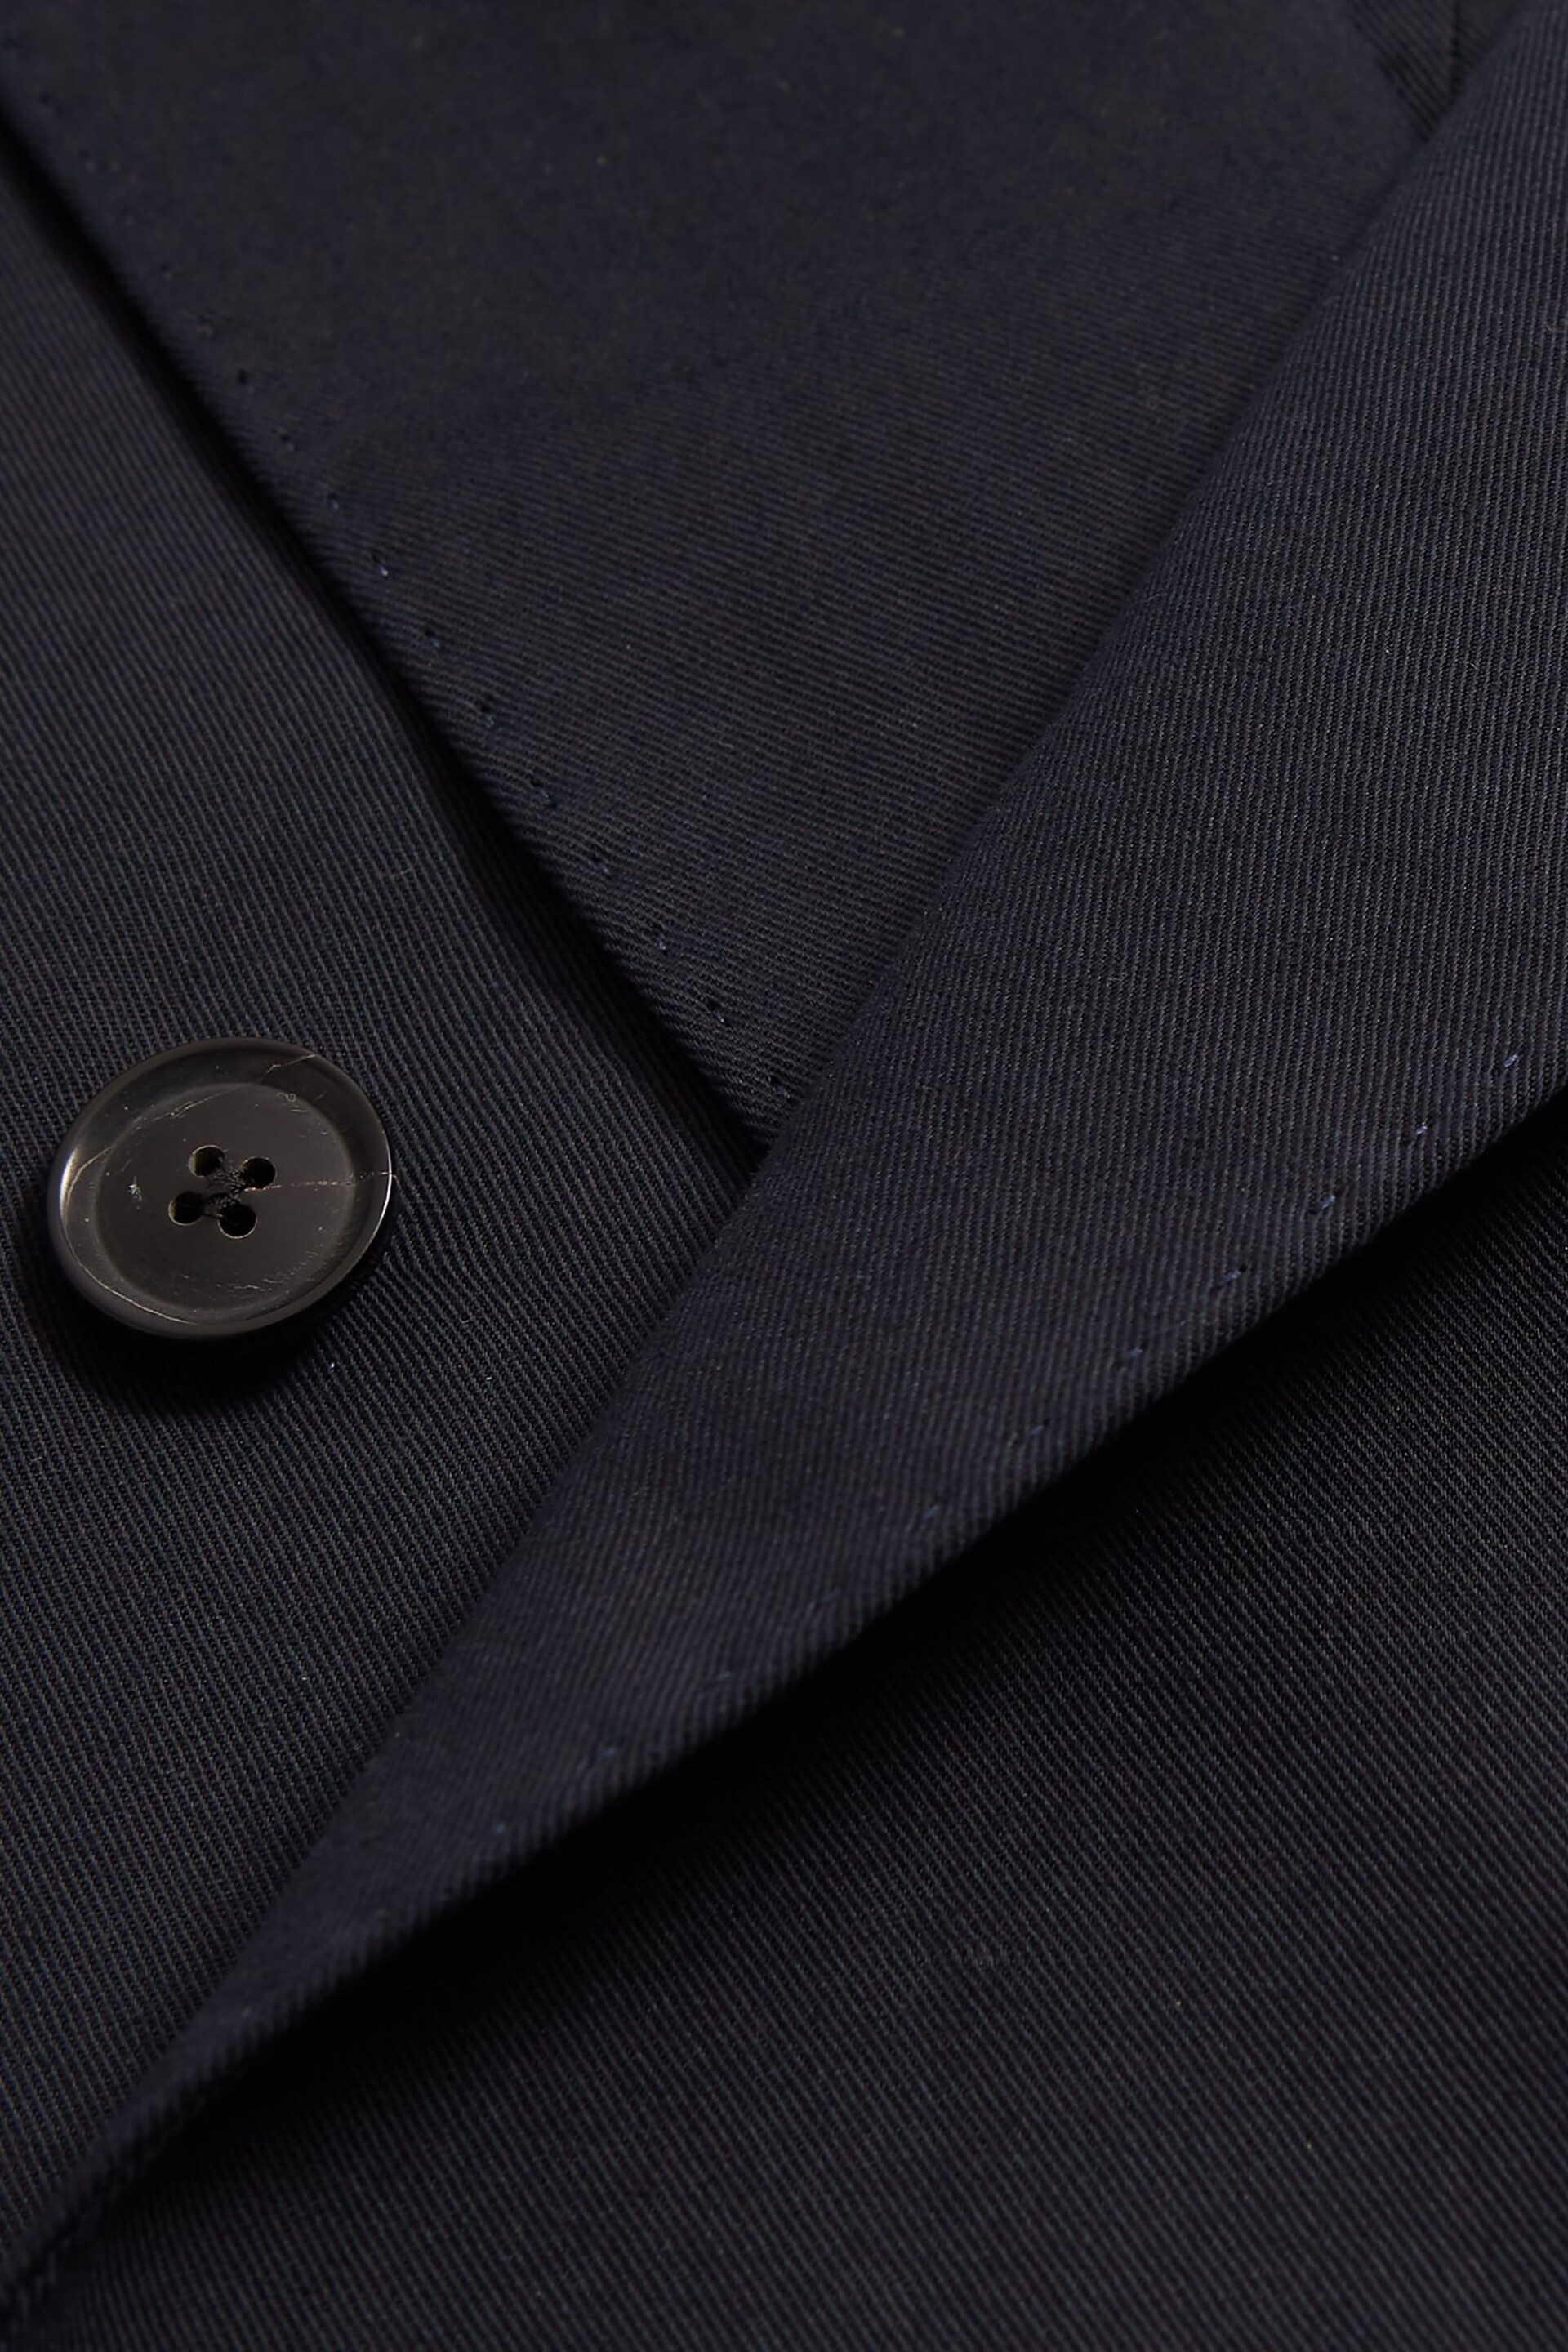 Reiss Navy Class Double Breasted Cotton-Linen Blazer - Image 7 of 7